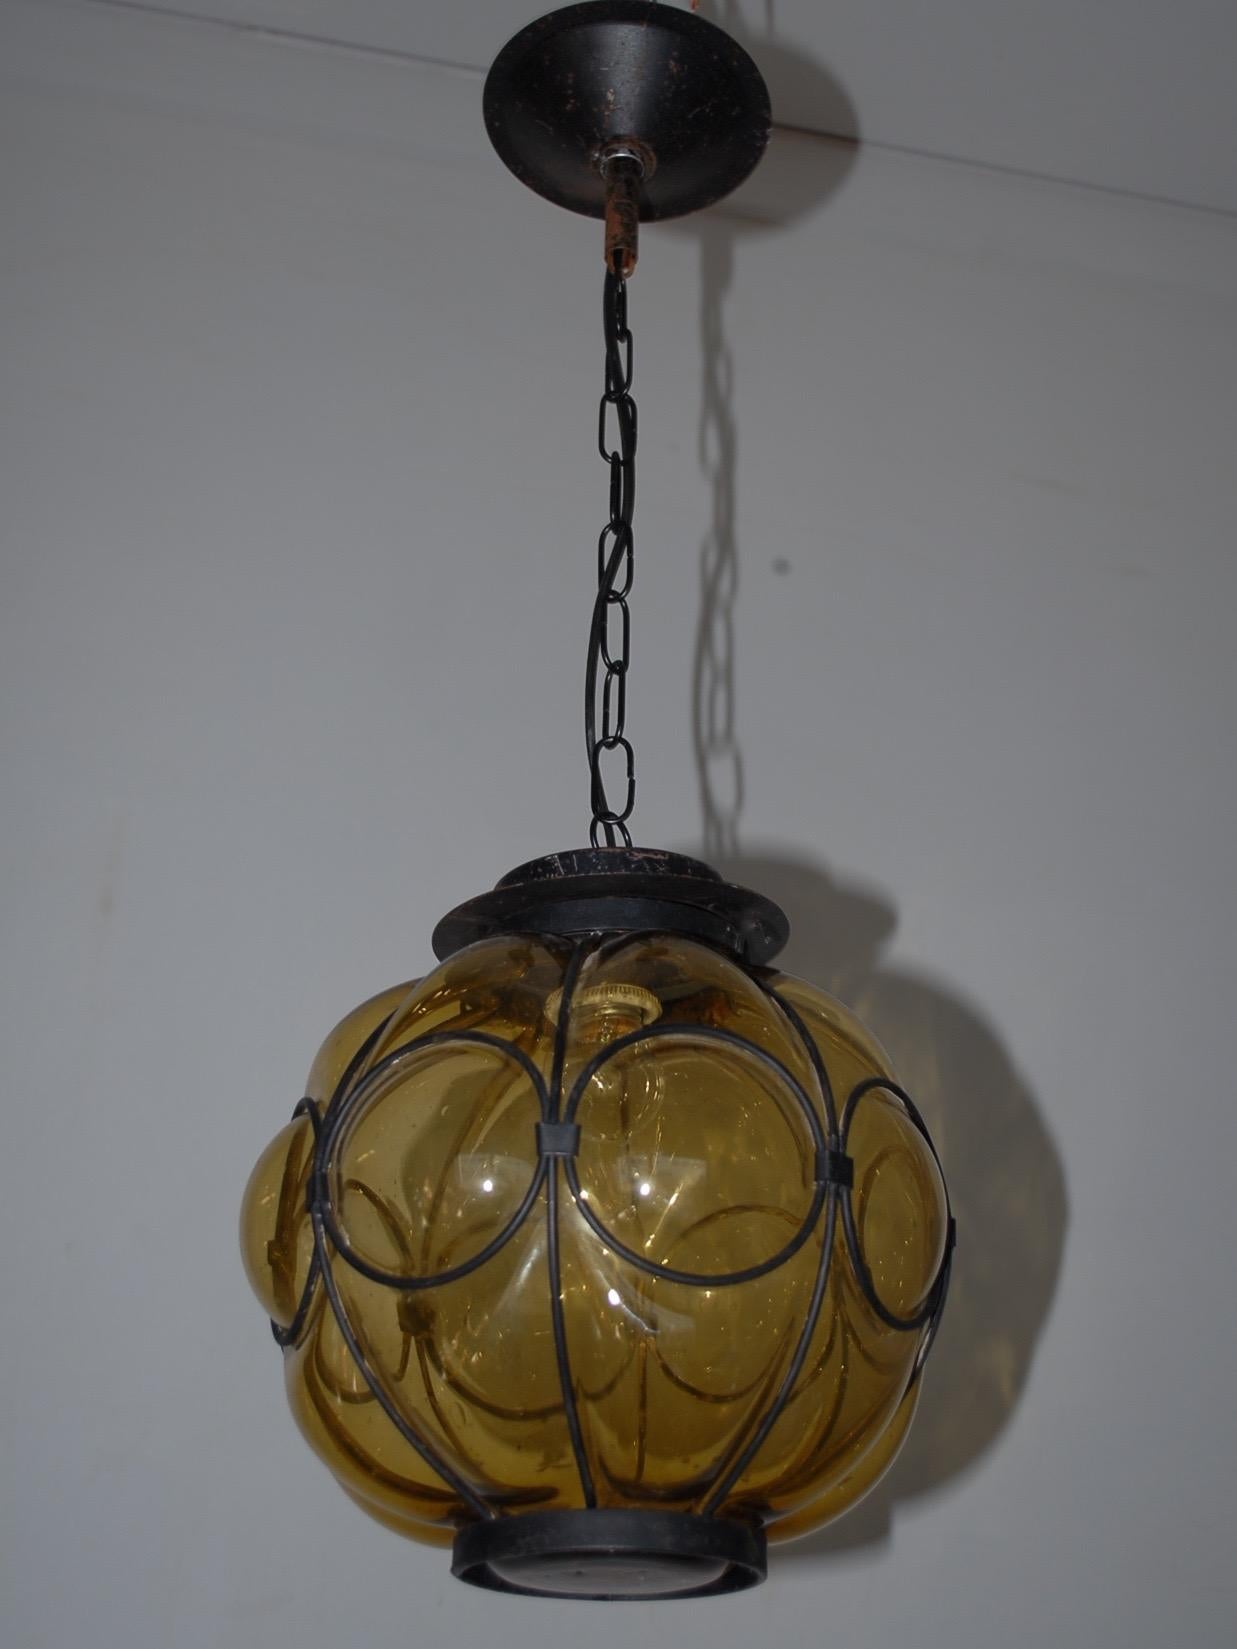 Rare & Handcrafted Midcentury Wrought Iron & Mouthblown Glass Venetian Pendant For Sale 3